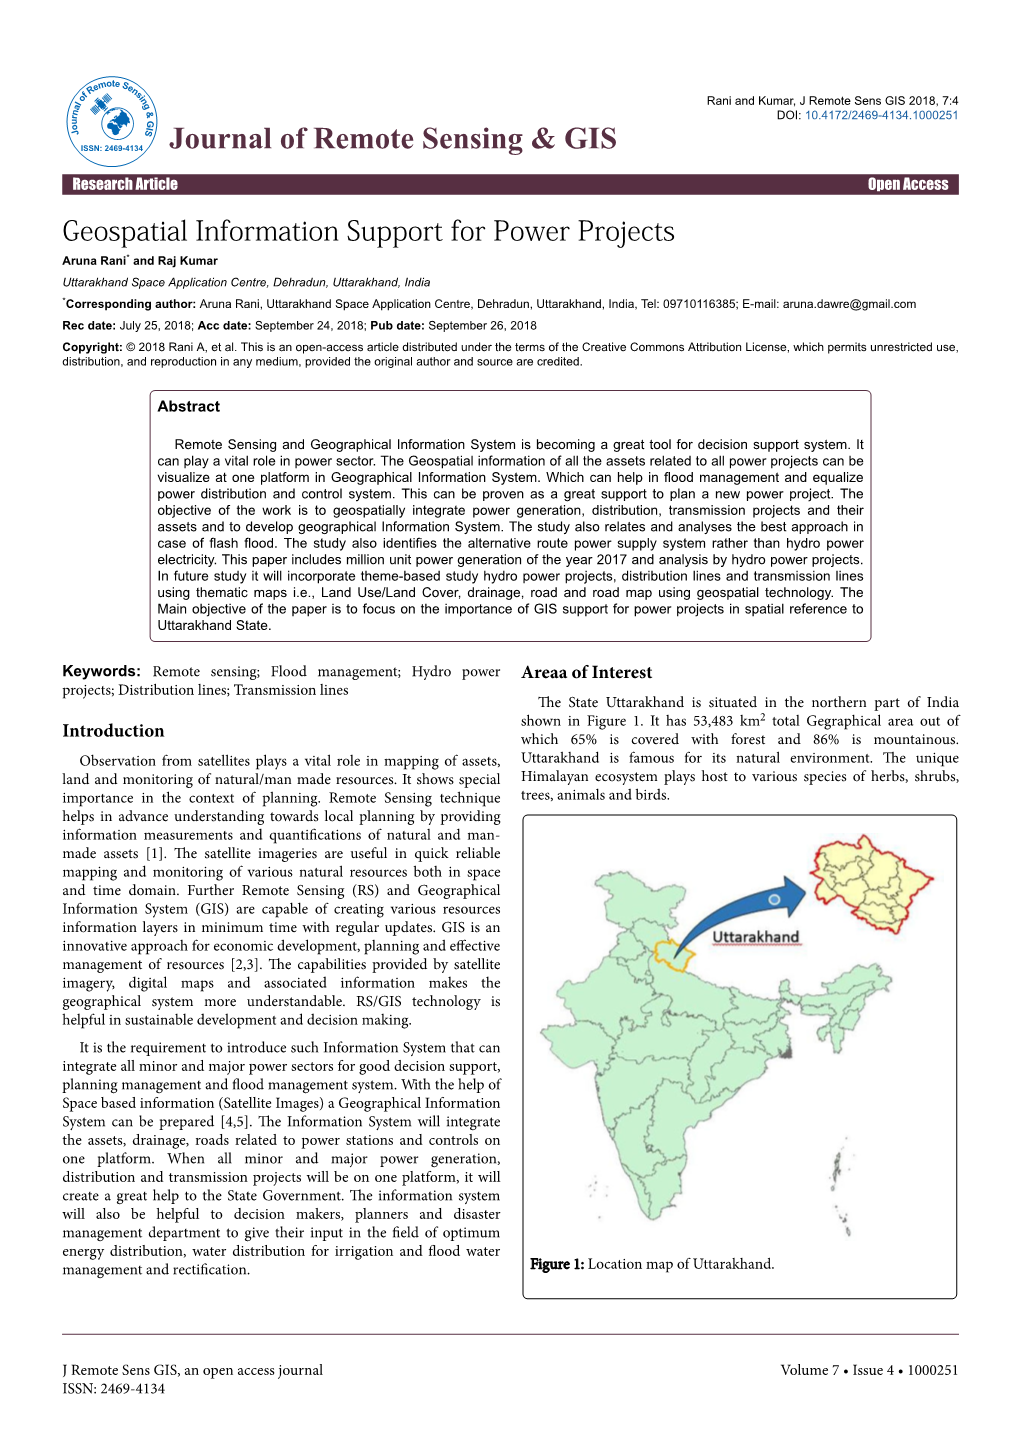 Geospatial Information Support for Power Projects